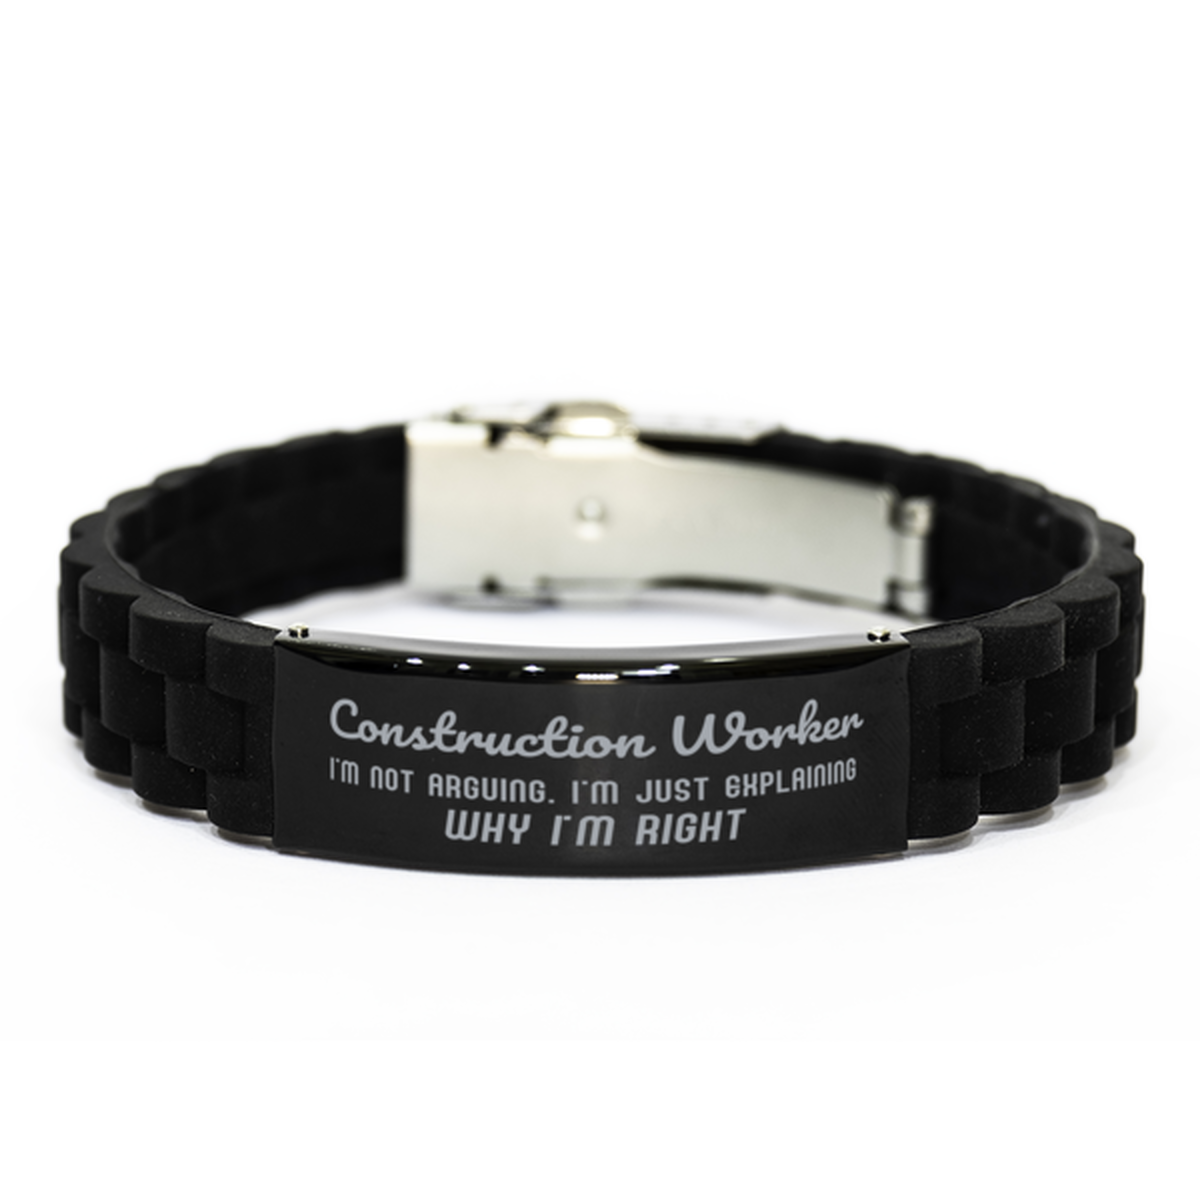 Construction Worker I'm not Arguing. I'm Just Explaining Why I'm RIGHT Black Glidelock Clasp Bracelet, Funny Saying Quote Construction Worker Gifts For Construction Worker Graduation Birthday Christmas Gifts for Men Women Coworker